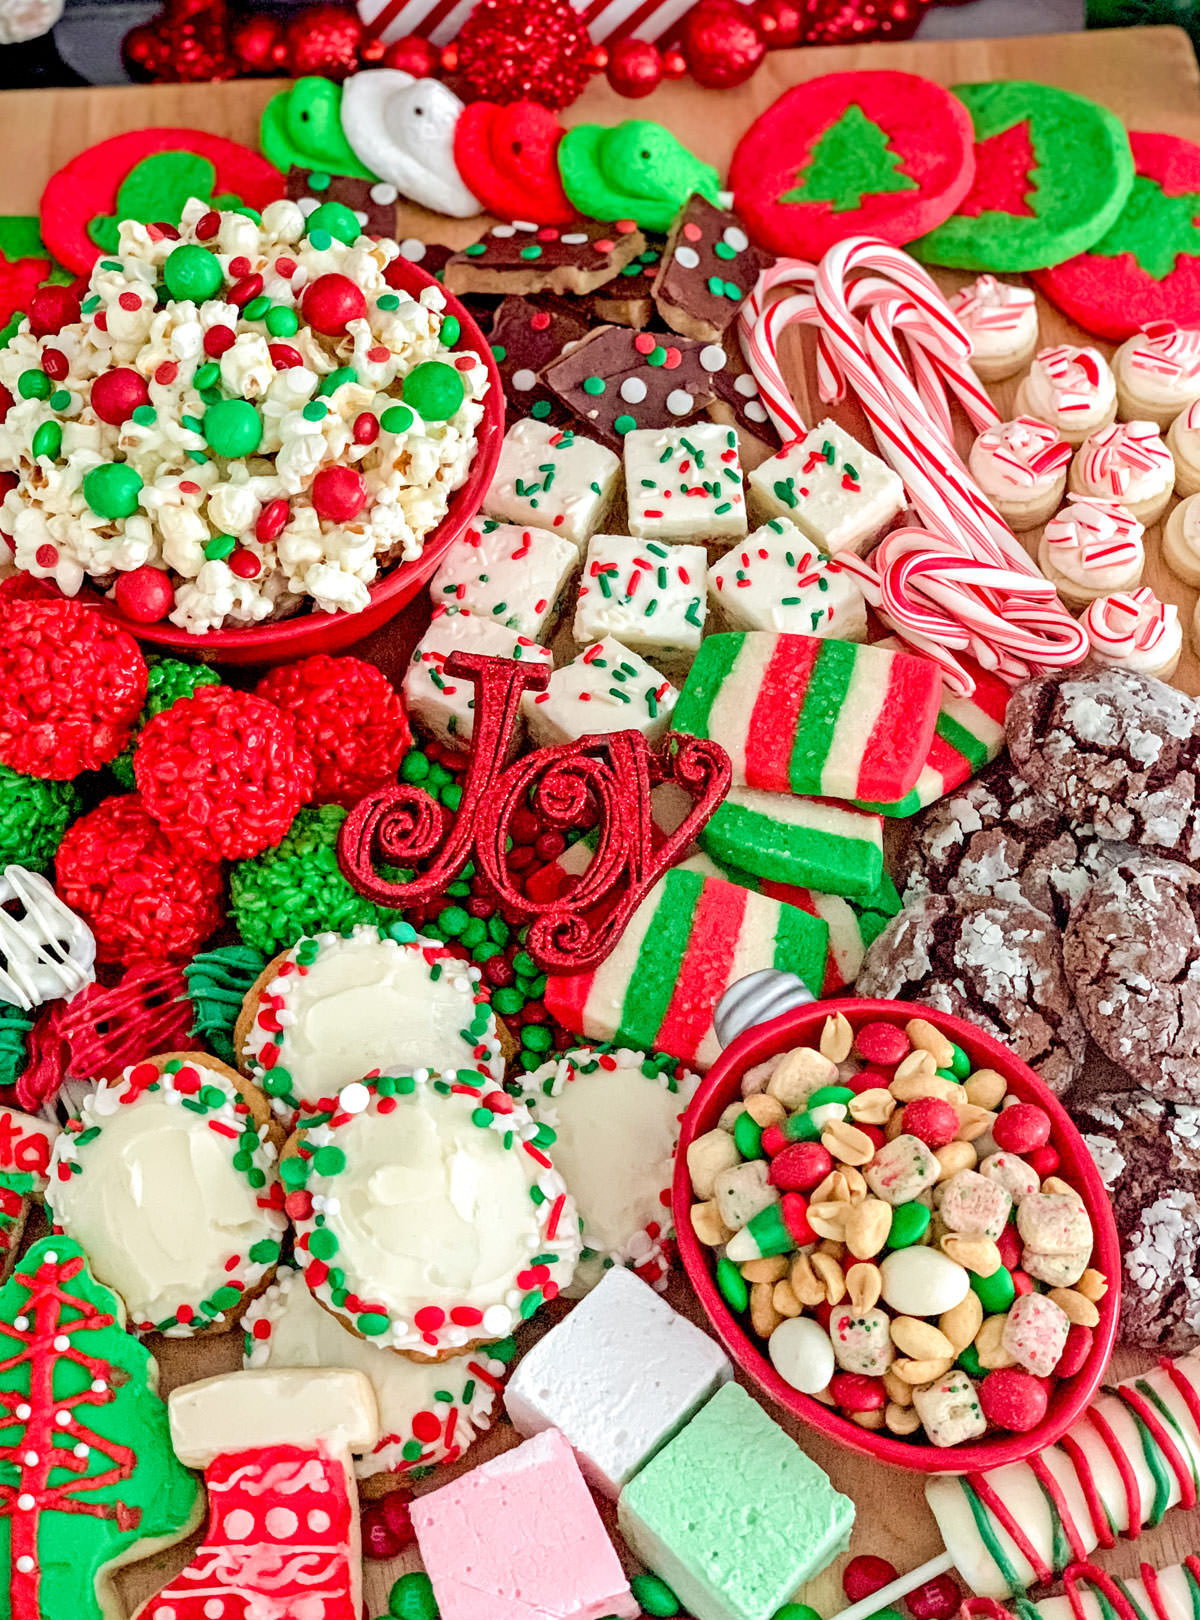 Overhead shot of a Christmas Dessert board filled with Christmas treats, cookies and candies.